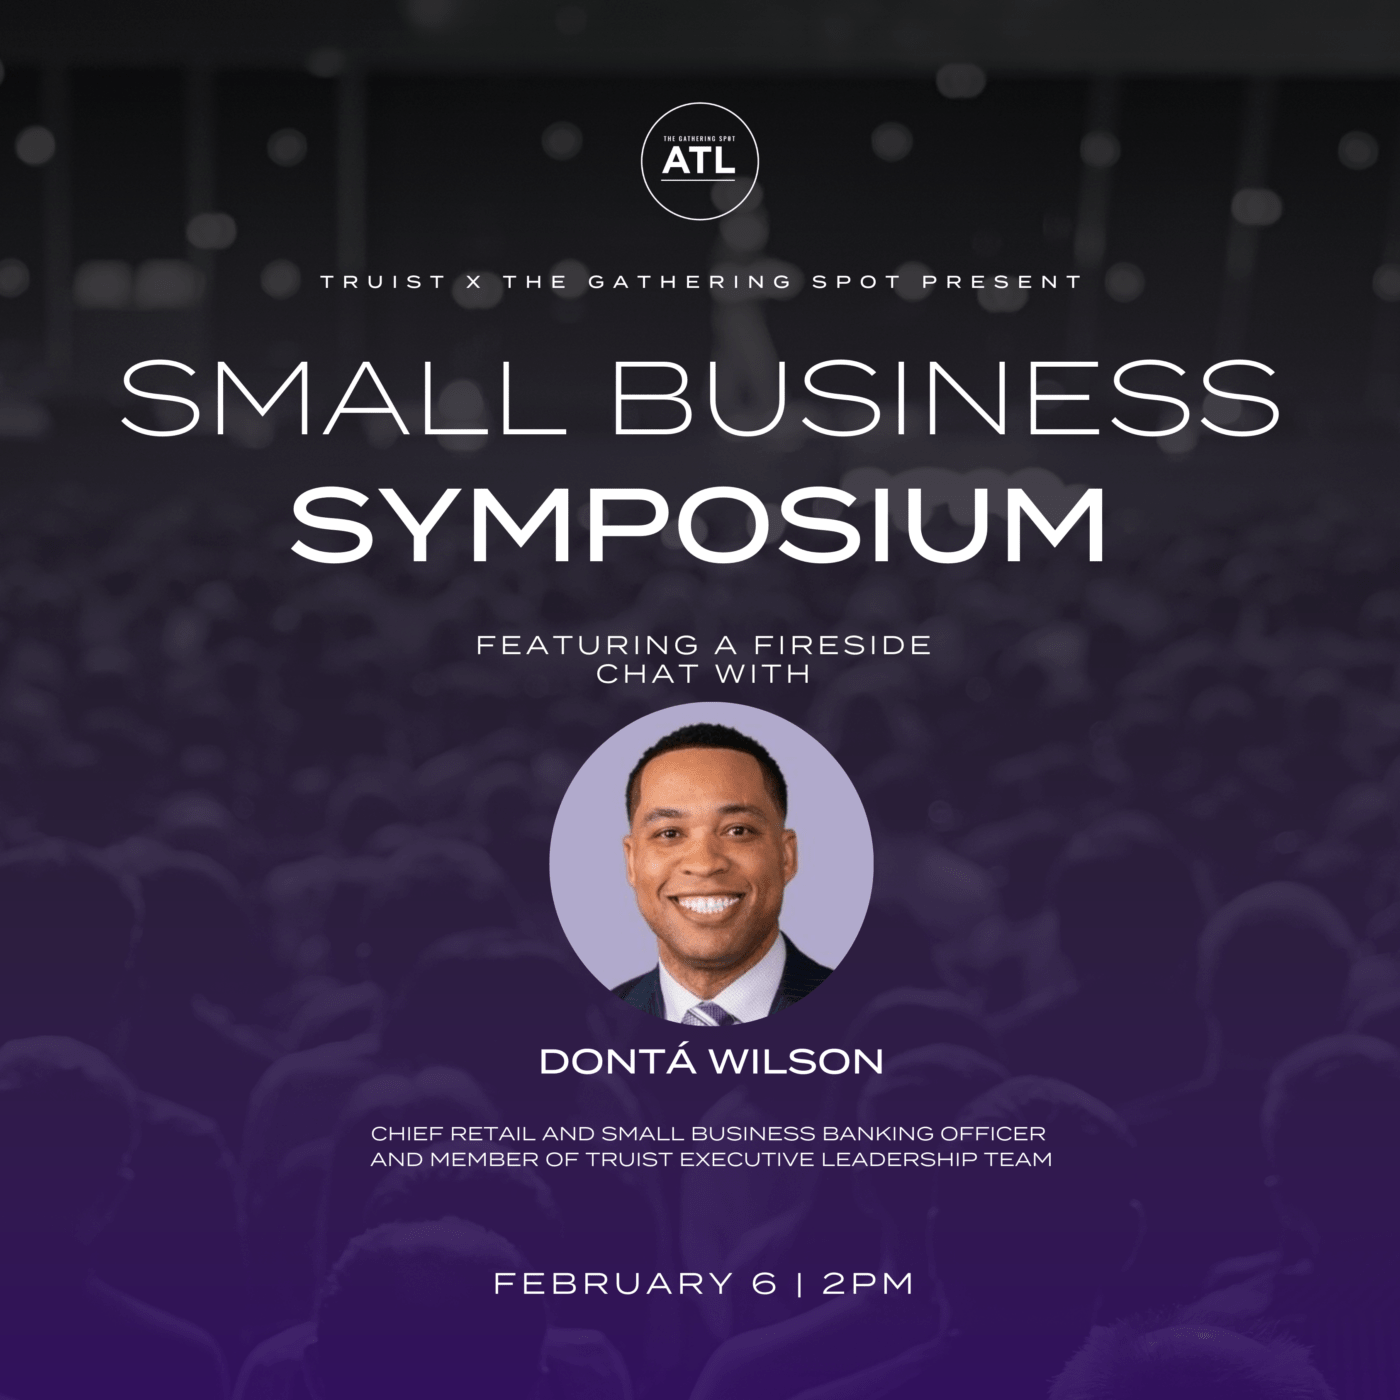 Truist x The Gathering Spot present: A Small Business Symposium